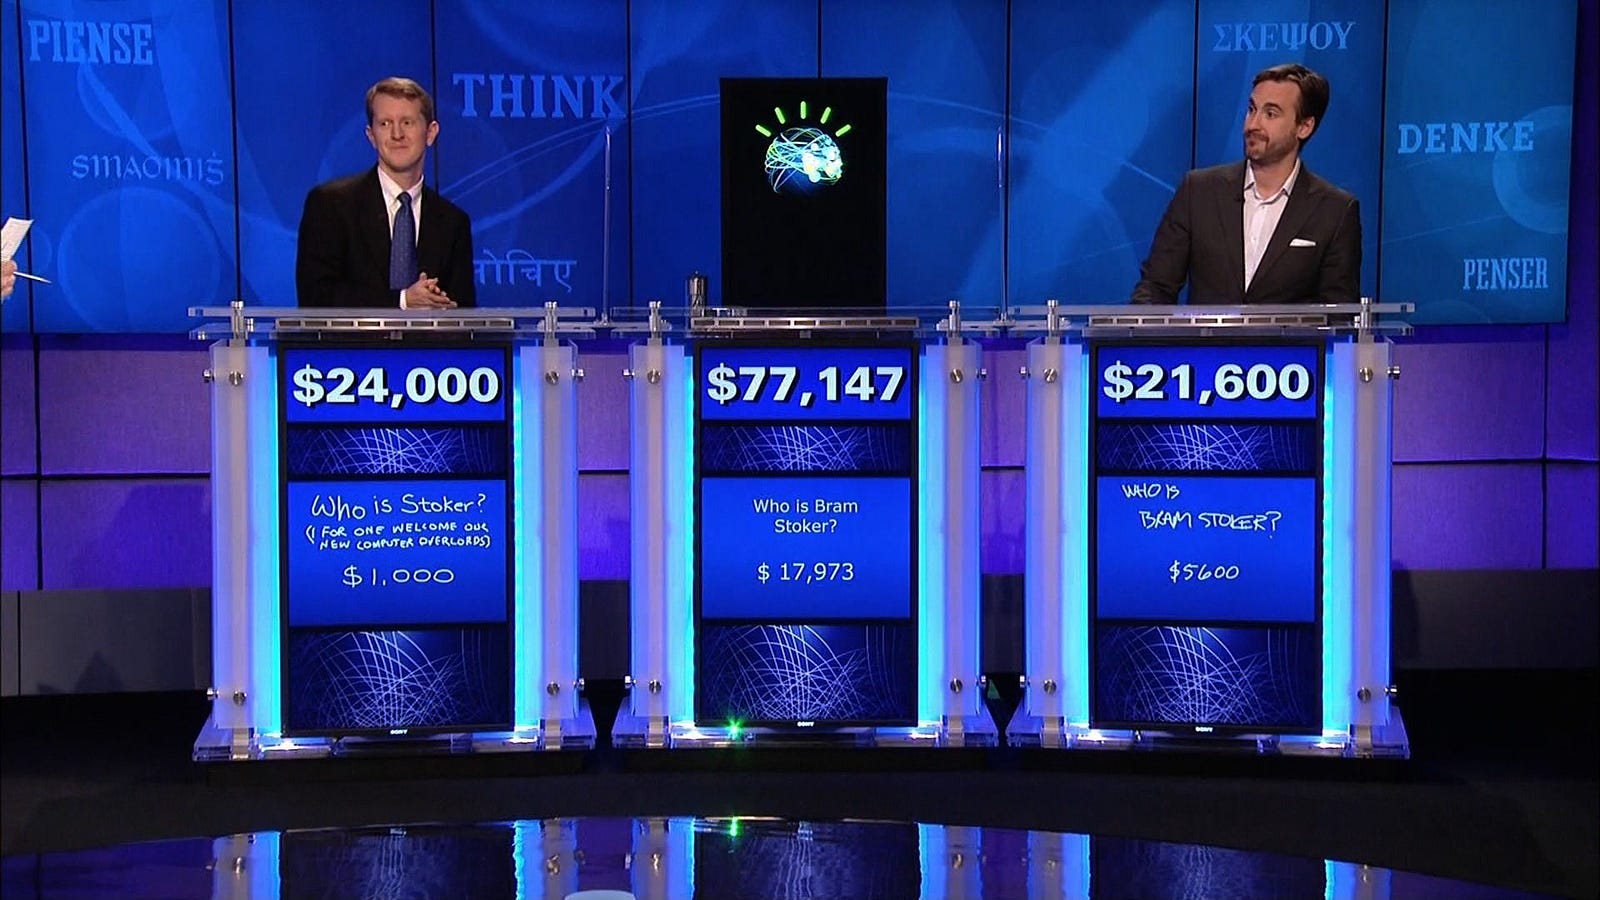 The Watson computer on the gameshow, Jeopardy. Credit: IBM